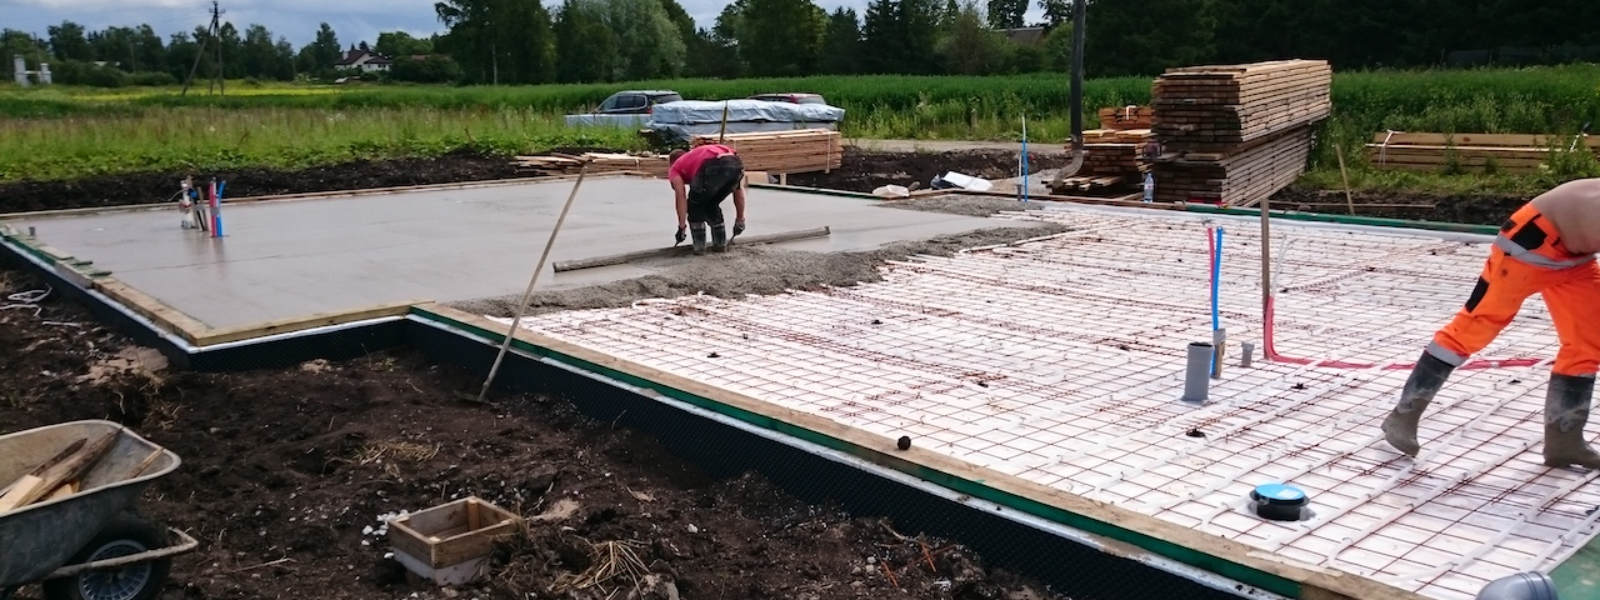 Ground works, concrete works and other bricklaying works in Tartu